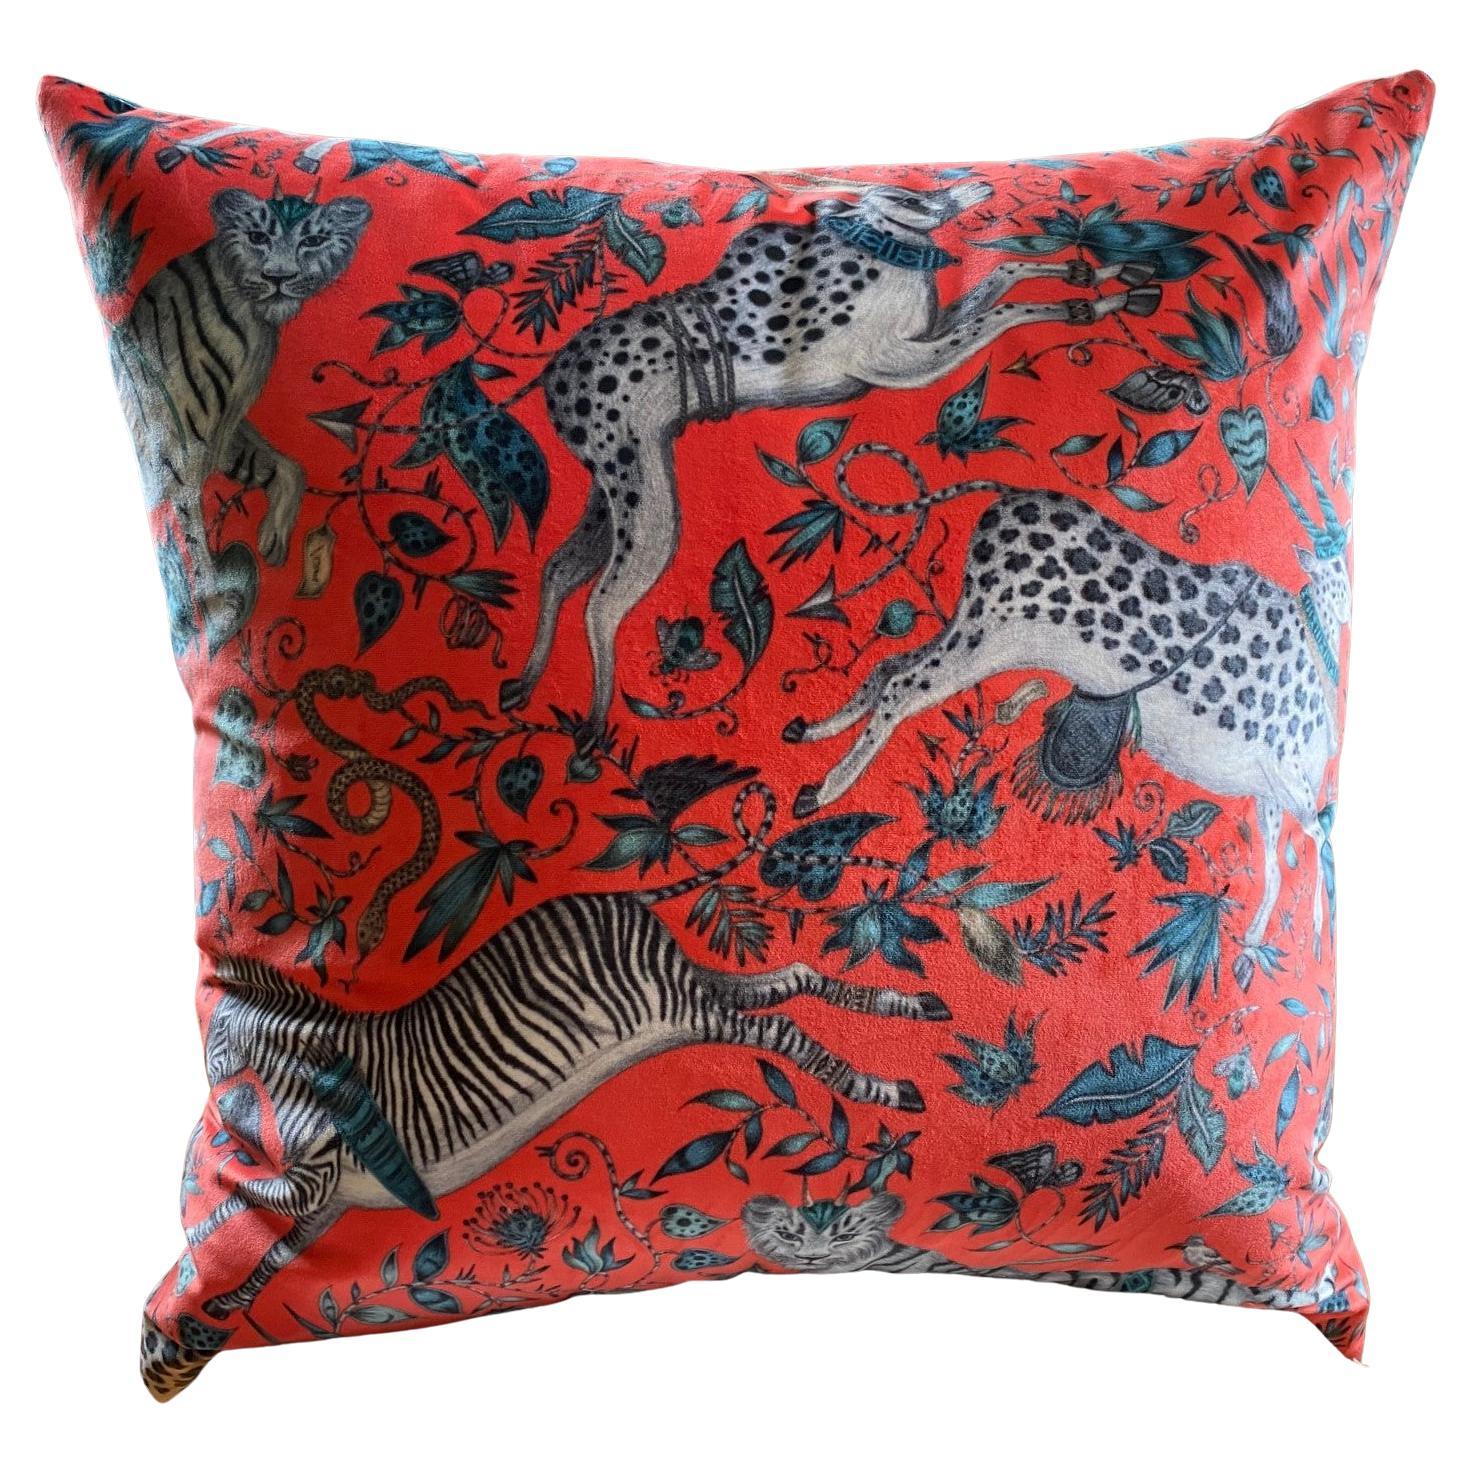 Coral Red and Teal Jungle Scene Velvet Decorative Pillow with Contrasting Teal